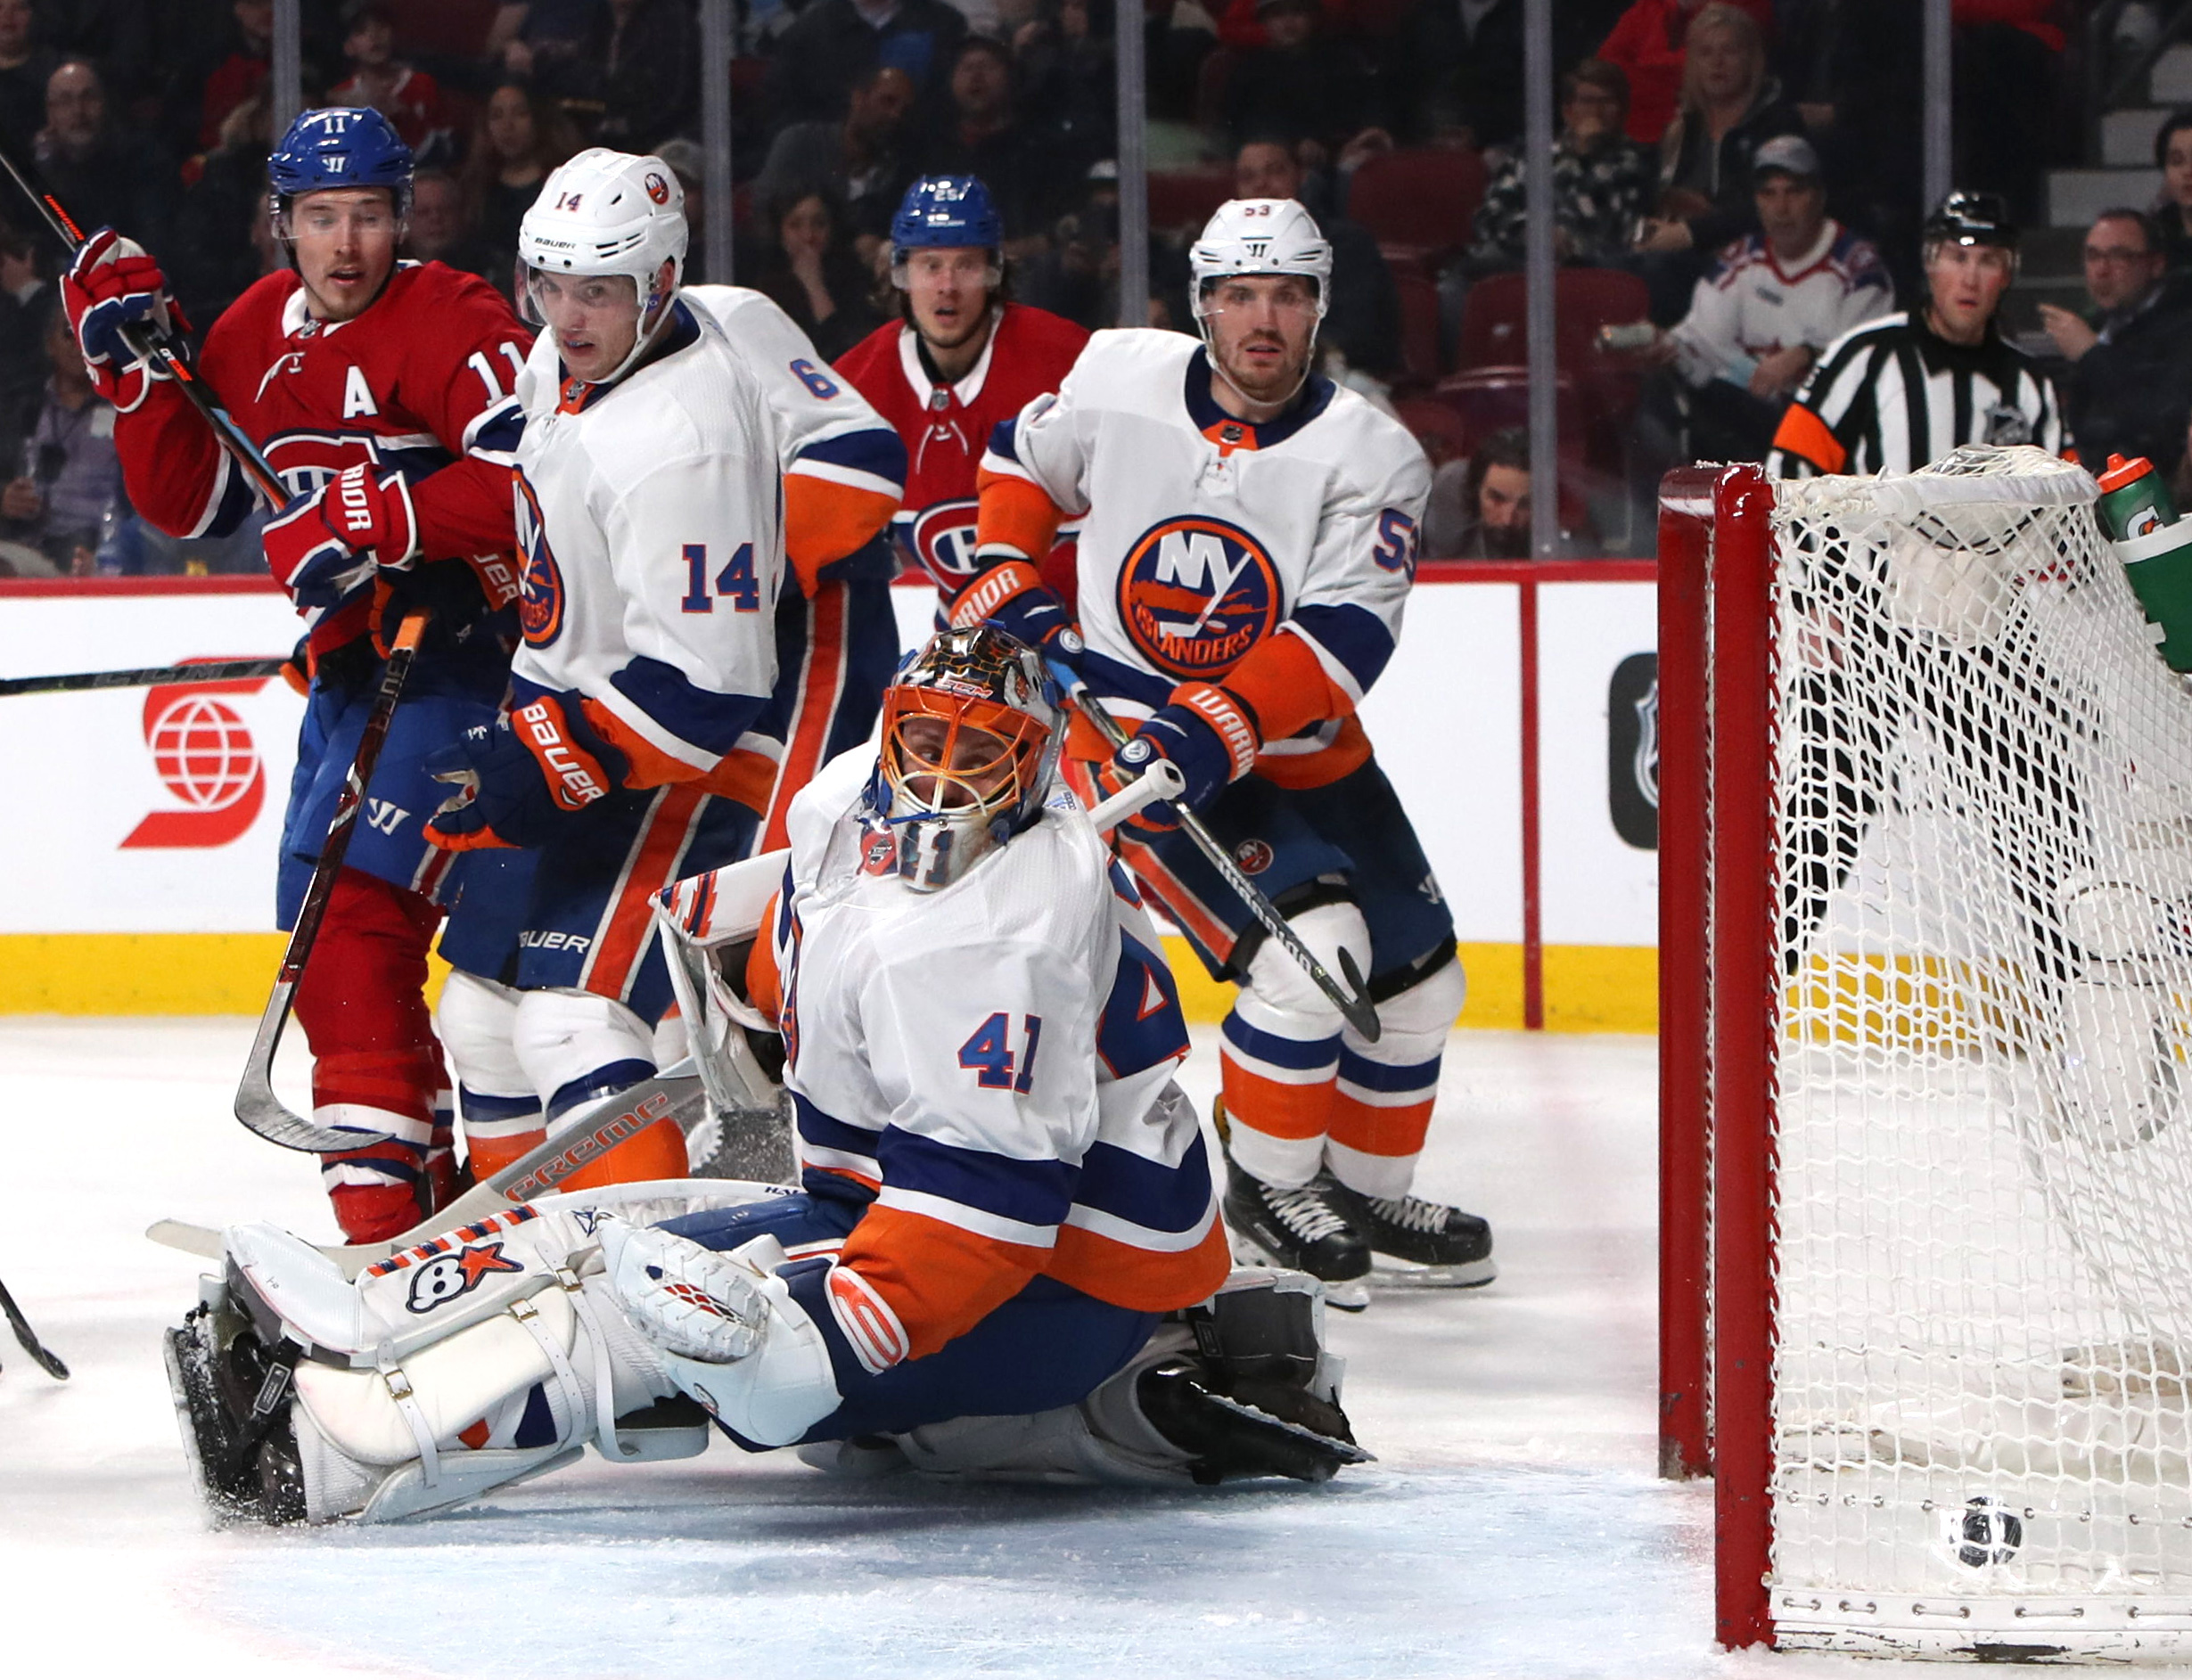 Feb 28, 2018; Montreal, Quebec, CAN; Montreal Canadiens right wing Nikita Scherbak (38) (not pictured) scores a goal against New York Islanders goaltender Jaroslav Halak (41) and defenseman Thomas Hickey (14) defends during the second period at Bell Centre. Mandatory Credit: Jean-Yves Ahern-USA TODAY Sports